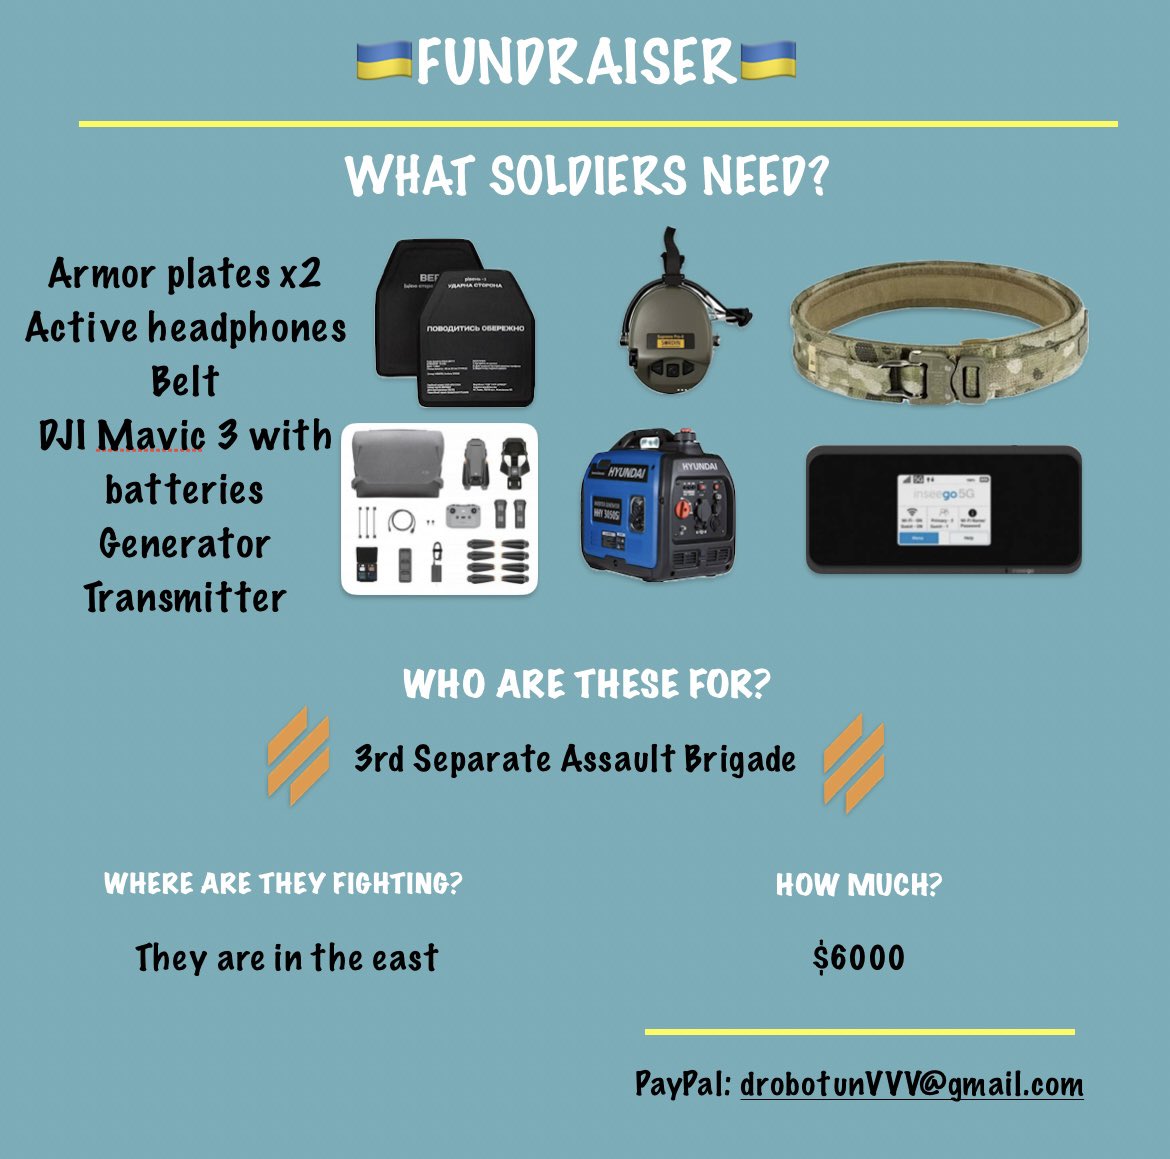 🇺🇦🇺🇦🇺🇦FUNDRAISER🇺🇦🇺🇦🇺🇦 🚨What the soldiers lost in Avdiivka🚨 🪖3rd Separate Assault Brigade: 🚨Needs: DJI Mavic 3 with extra batteries, generator, armor plates in body armor х2, belt, active headphones, transmitter! 🎯 Goal: $6000 🙏🎯 🙏PLEASE: RT & B👀ST & DONATE 🅿️🅿️:…